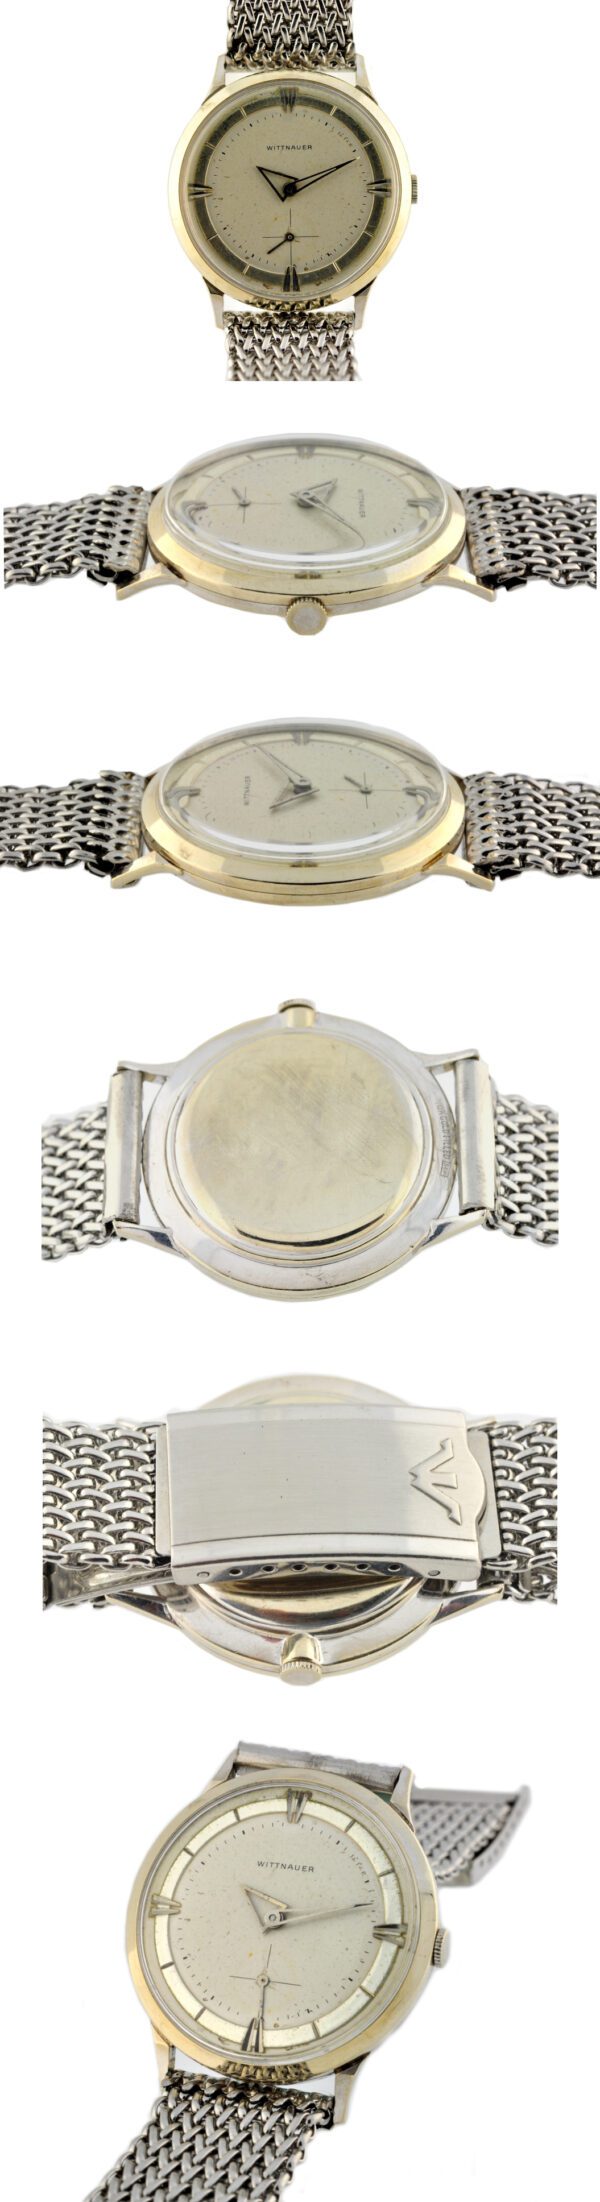 1950s Wittnauer white-gold-filled watch with original case, two-tone dial, arrow markers, hands, and cleaned manual winding Swiss movement.